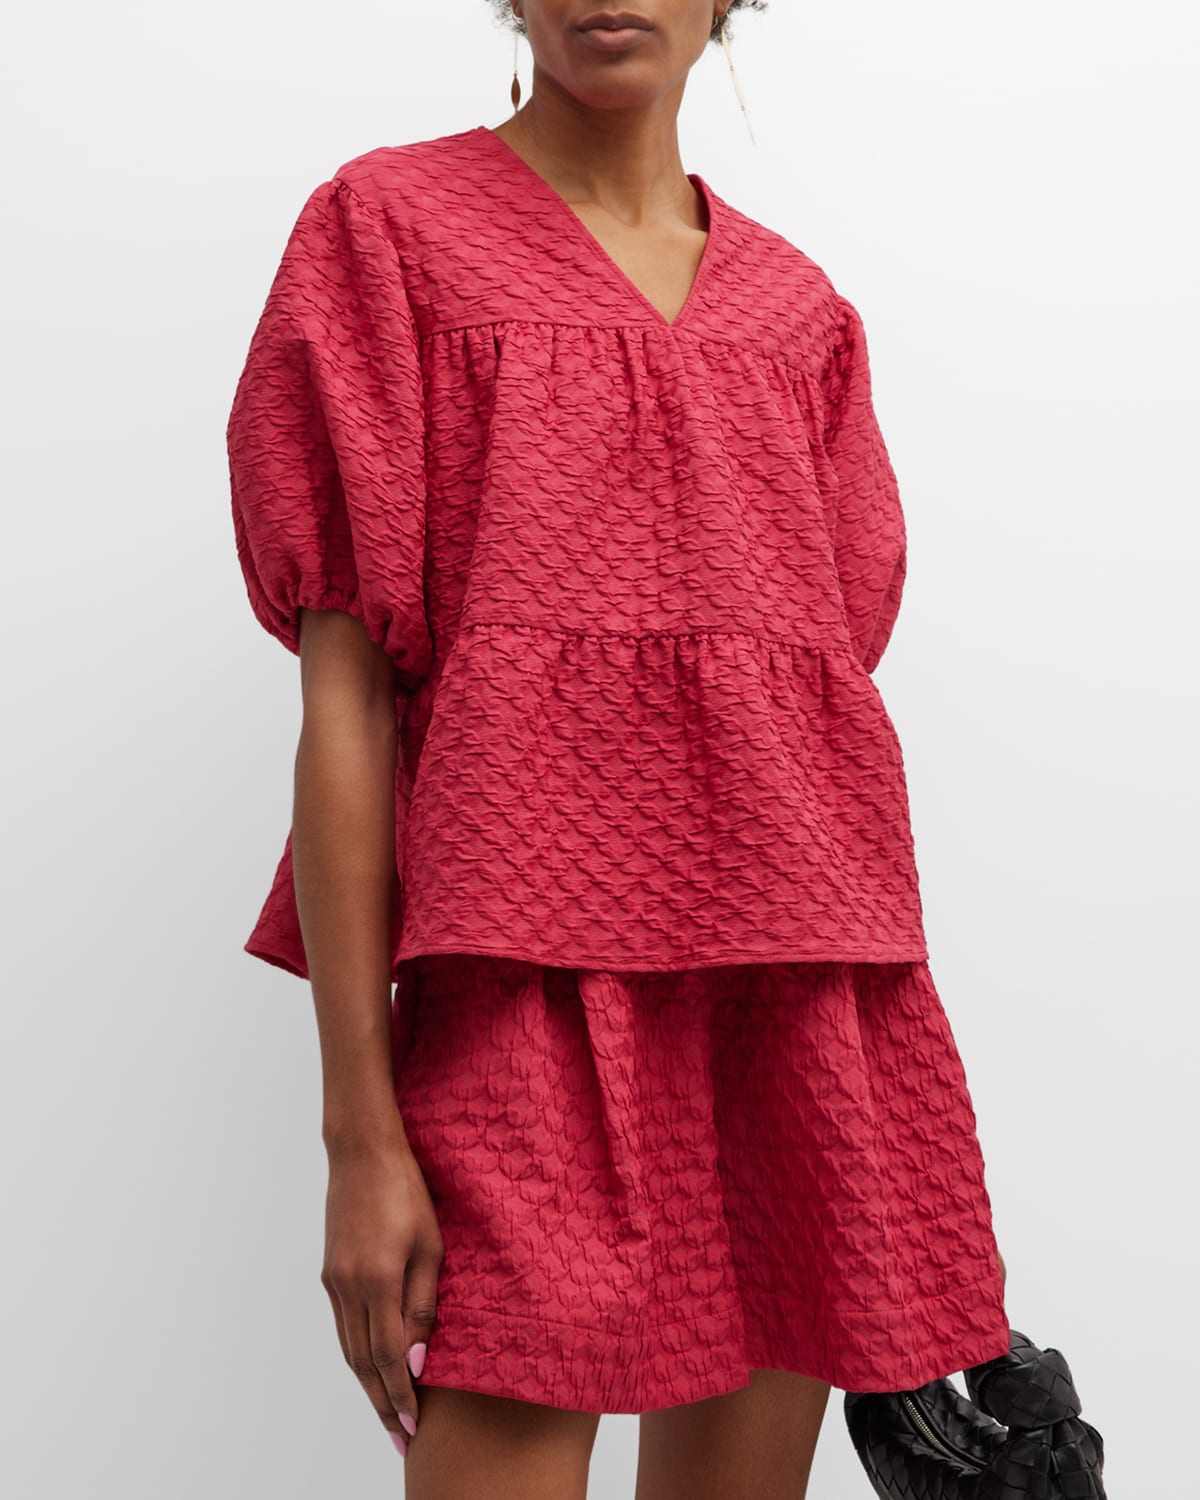 Merlette Paraiso Tiered Puff-Sleeve Jacquard Top